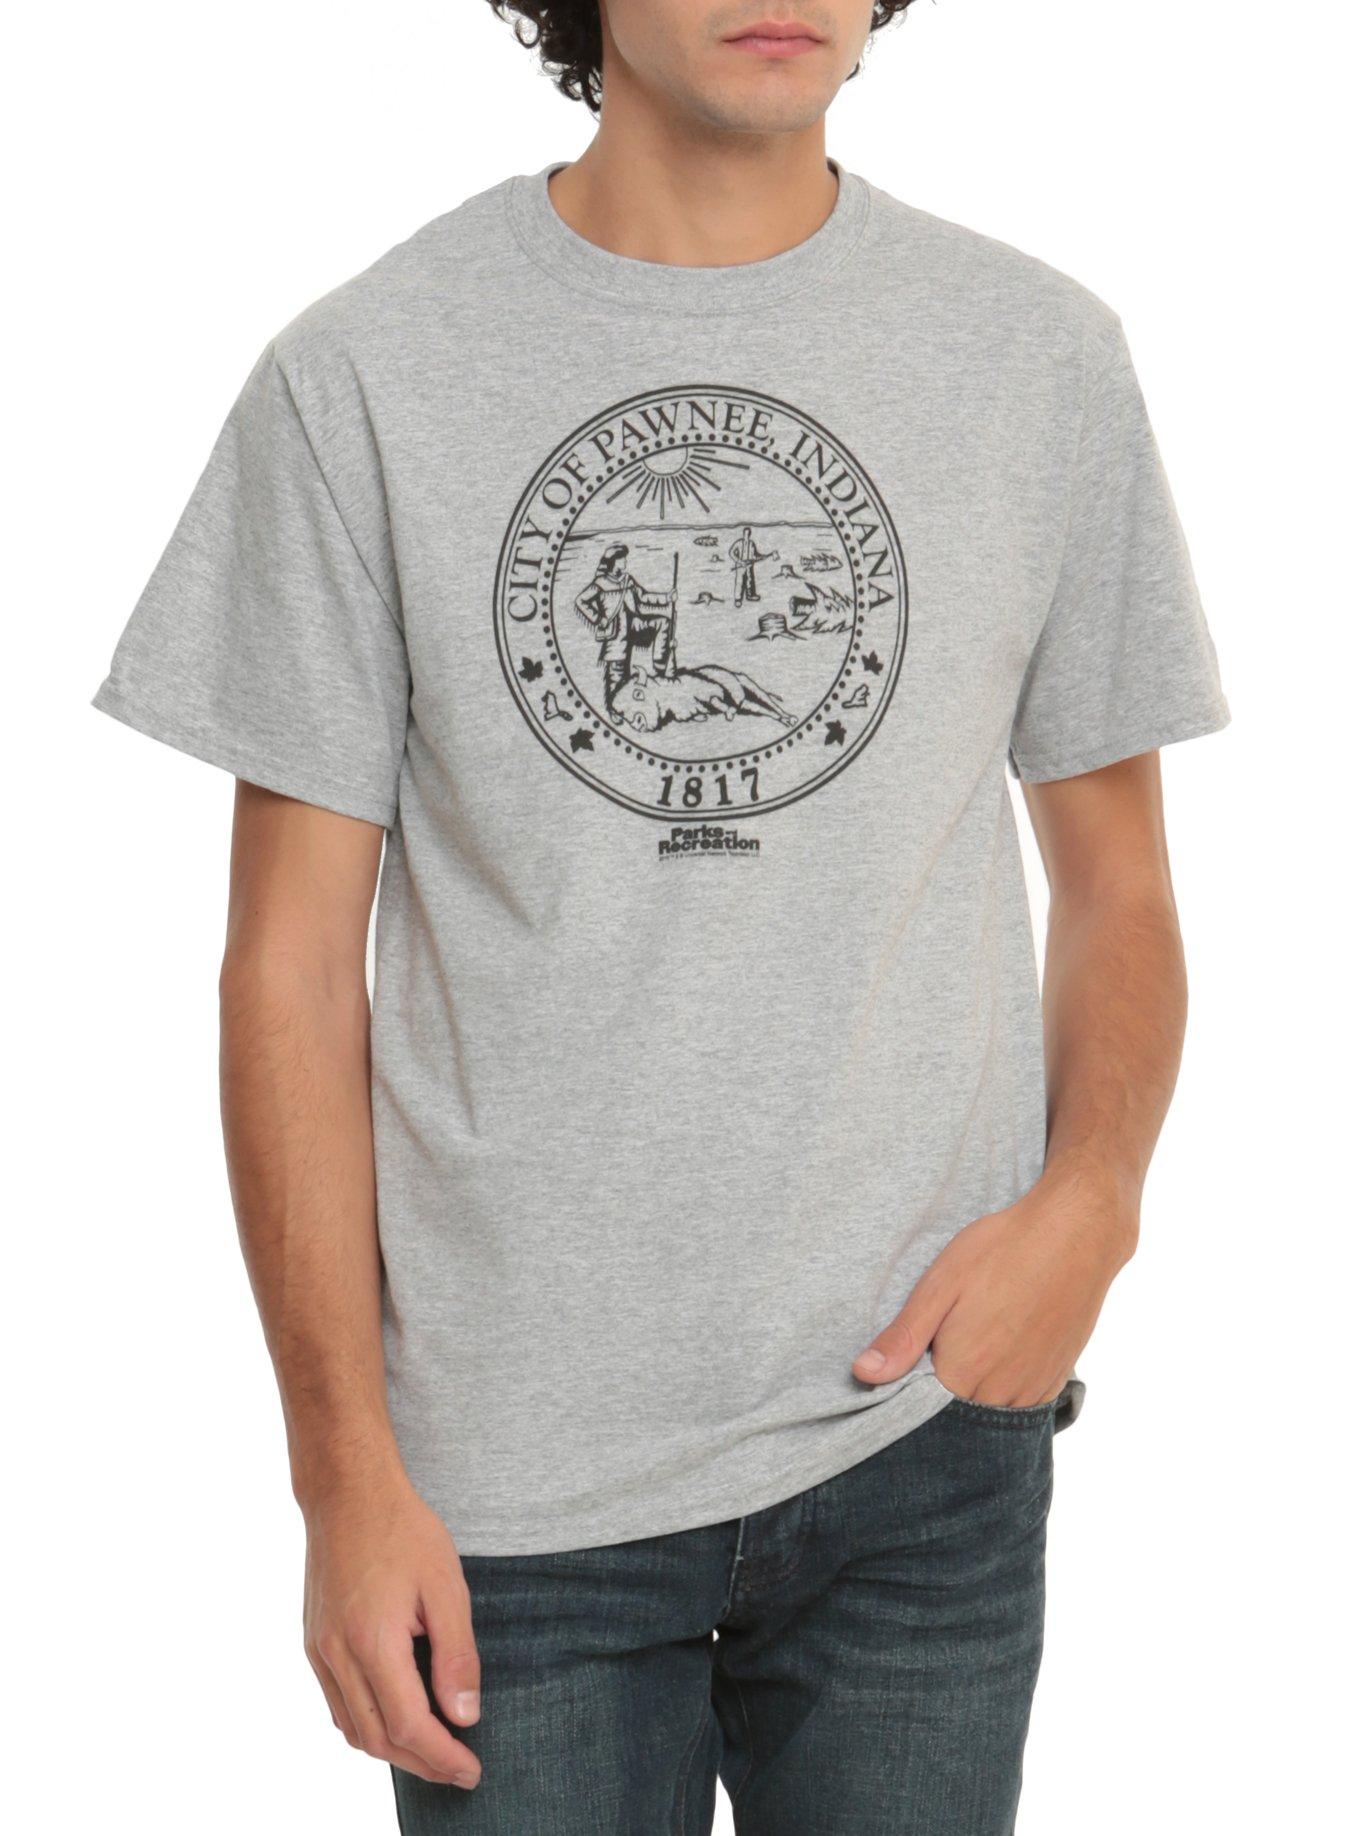 Parks And Recreation Pawnee Seal T-Shirt, BLACK, hi-res